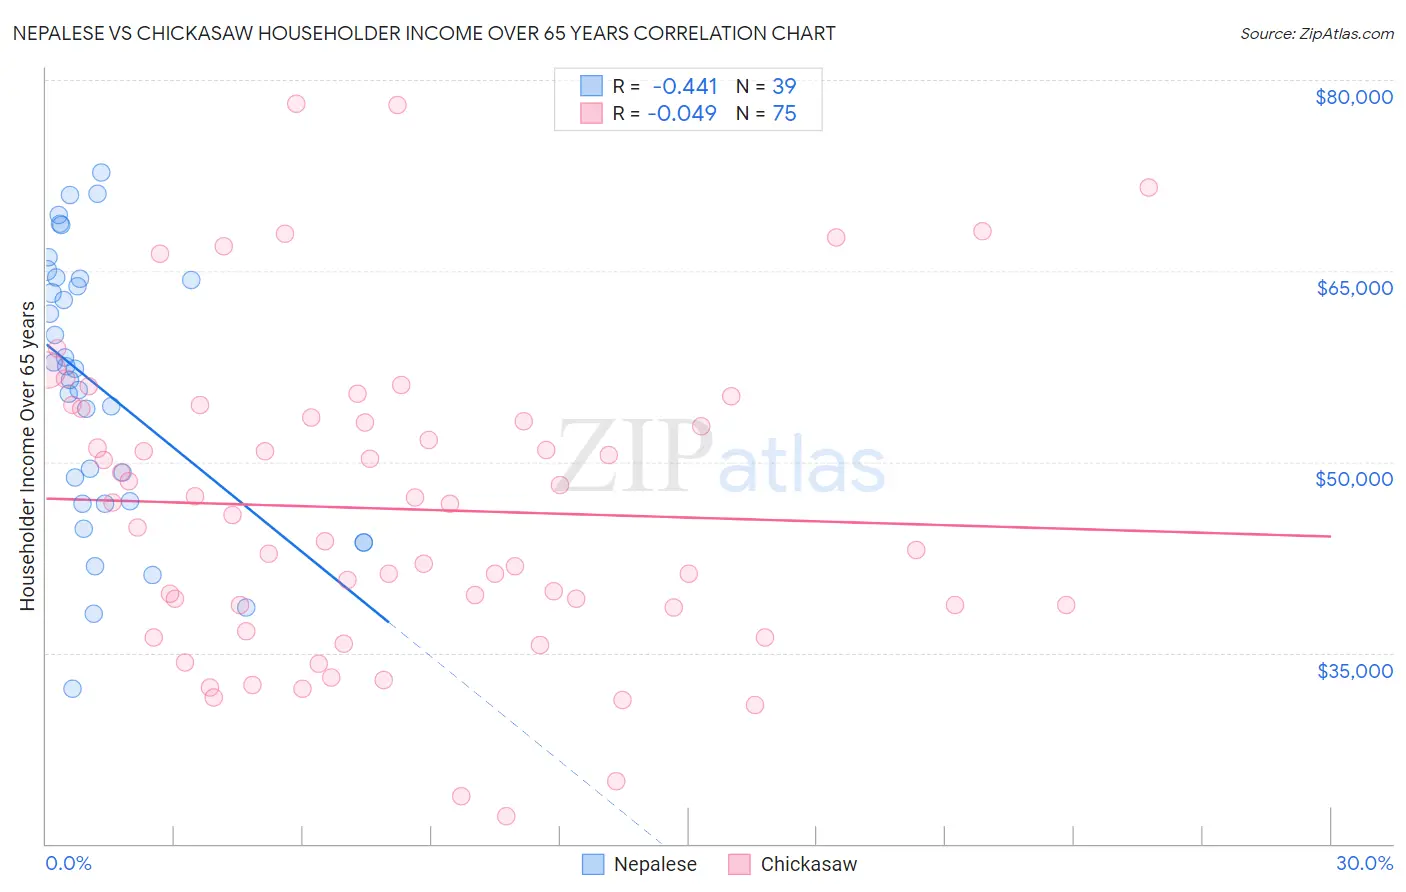 Nepalese vs Chickasaw Householder Income Over 65 years